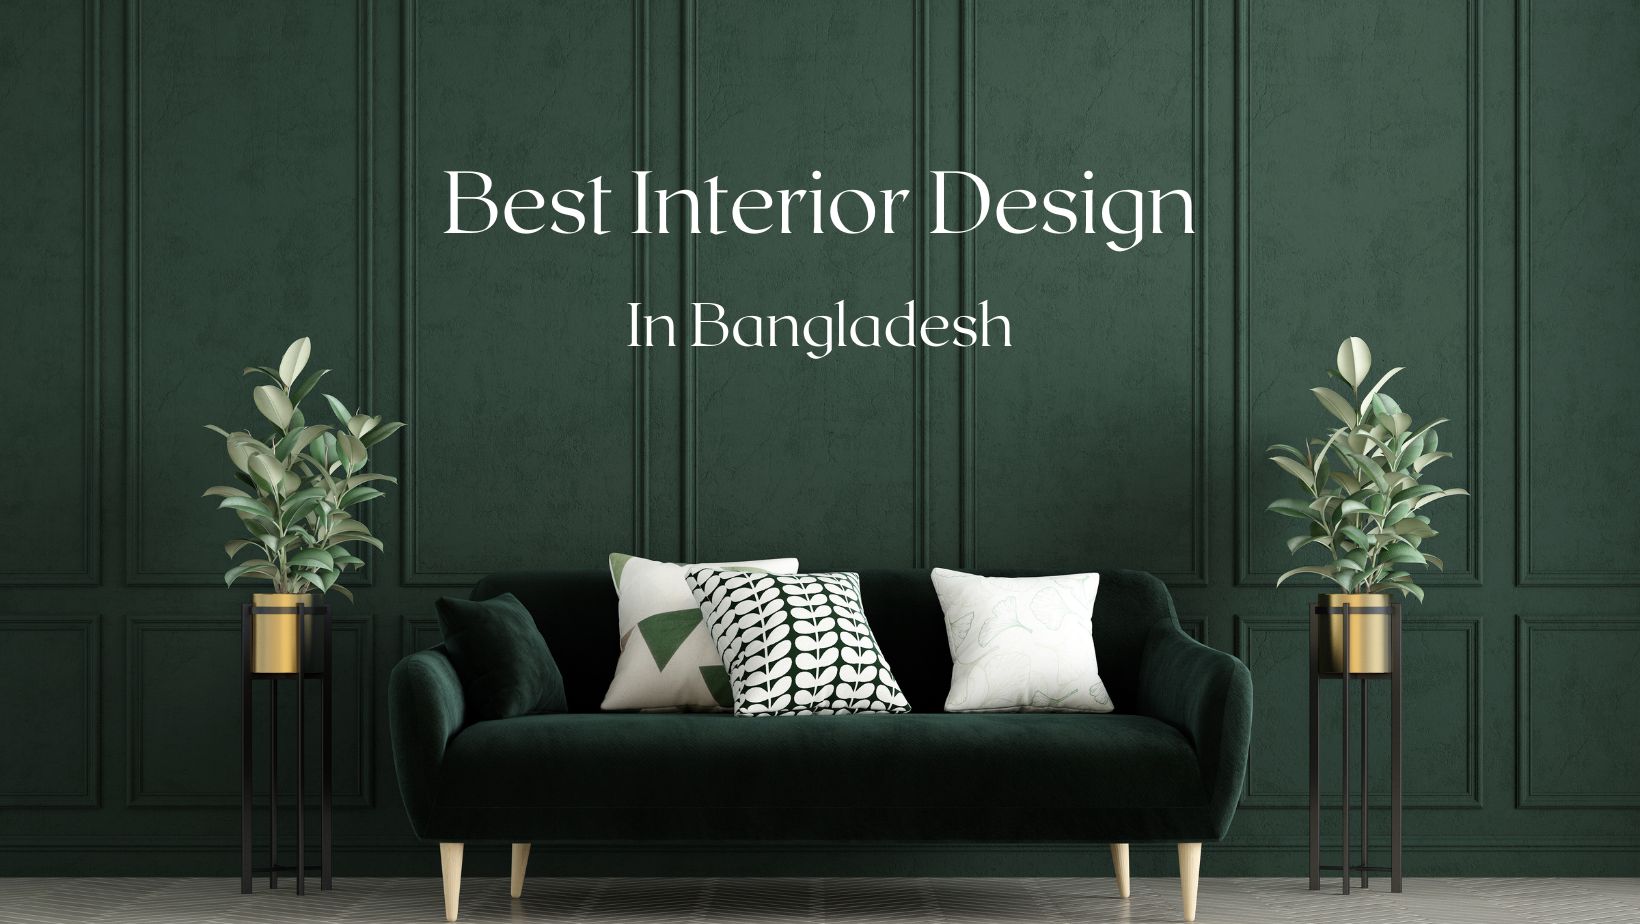 Best Interior Design in Bangladesh for your self